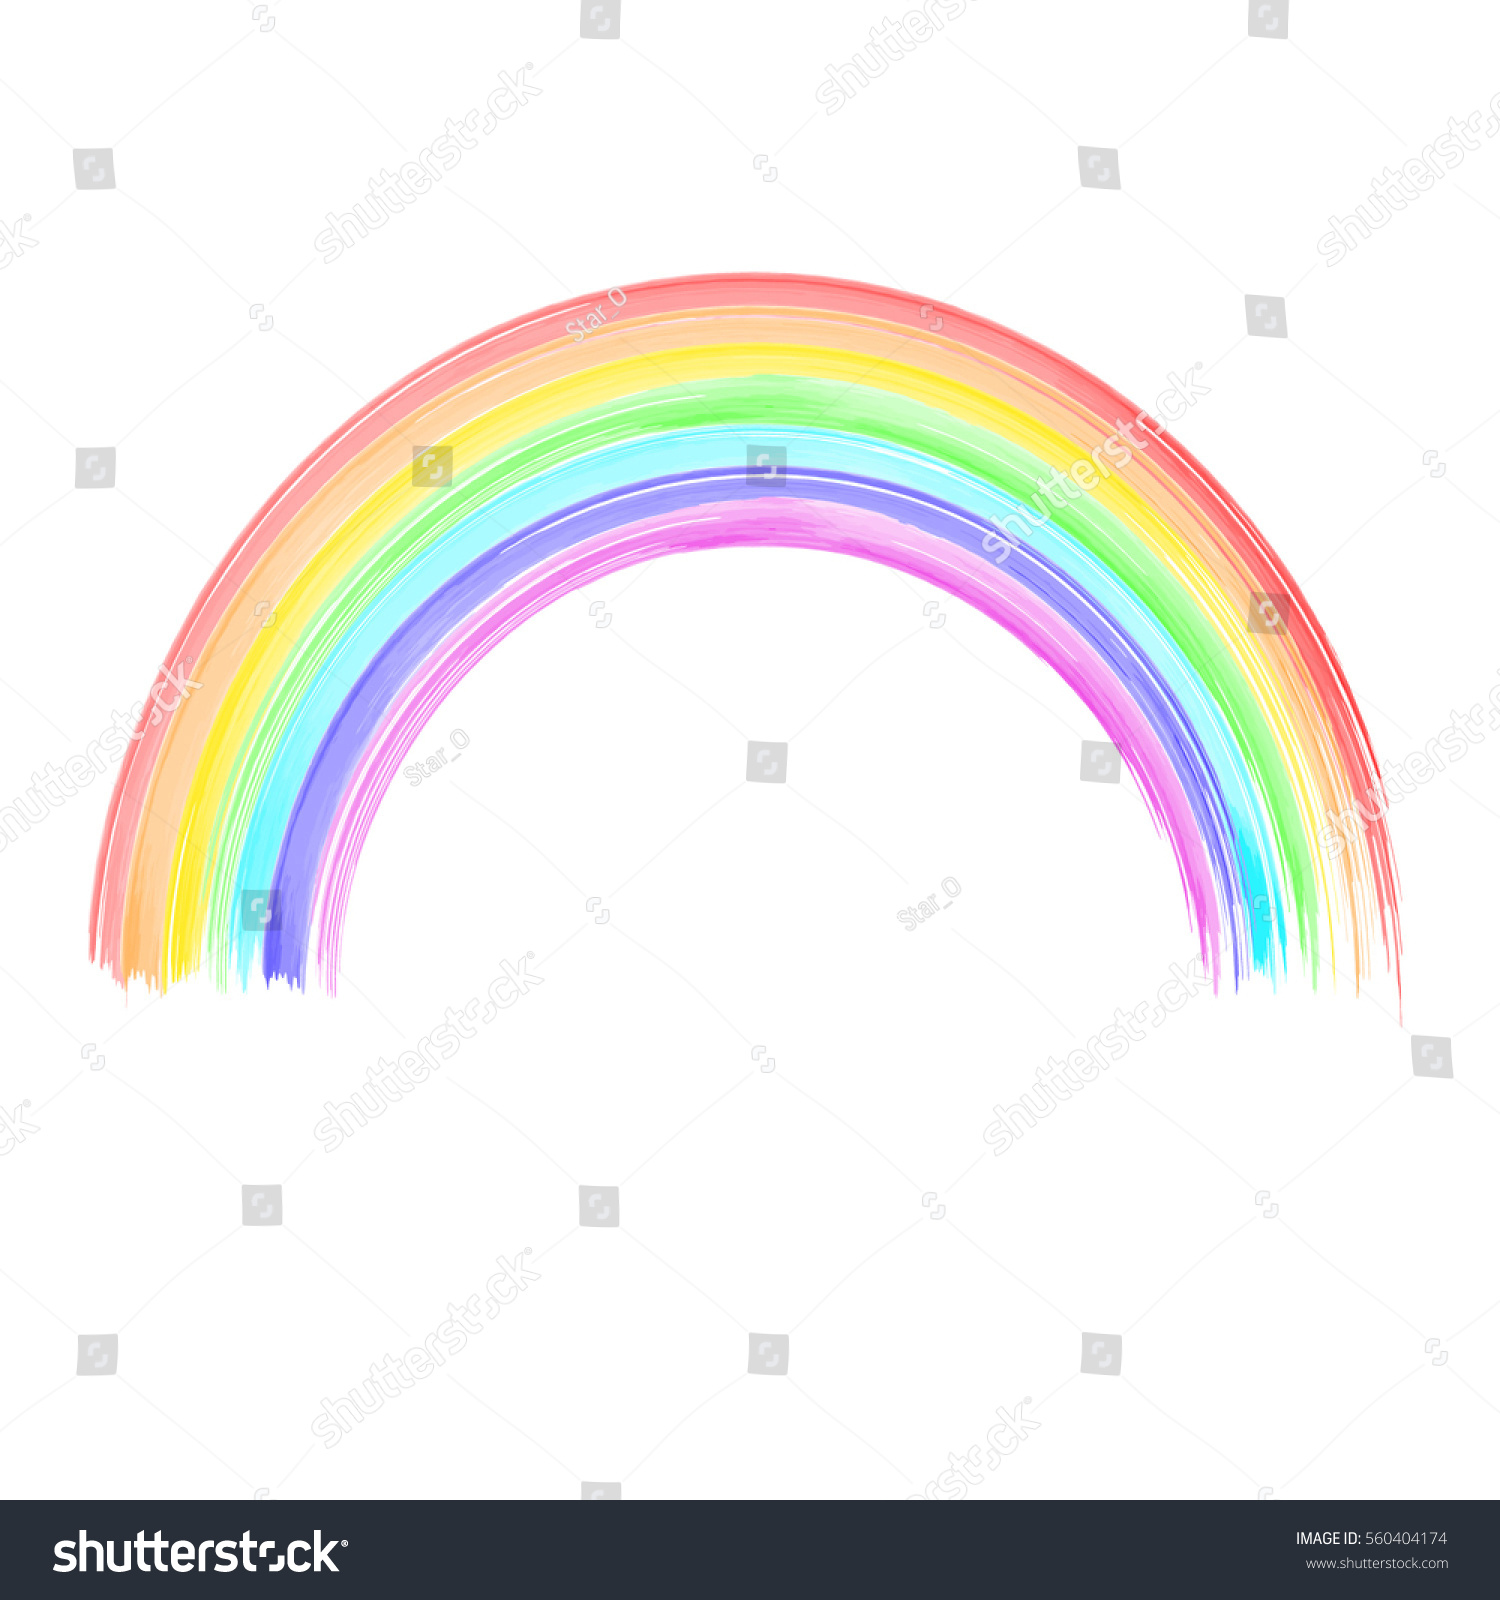 Download Watercolor Rainbow On White Background Watercolor Stock Vector 560404174 - Shutterstock